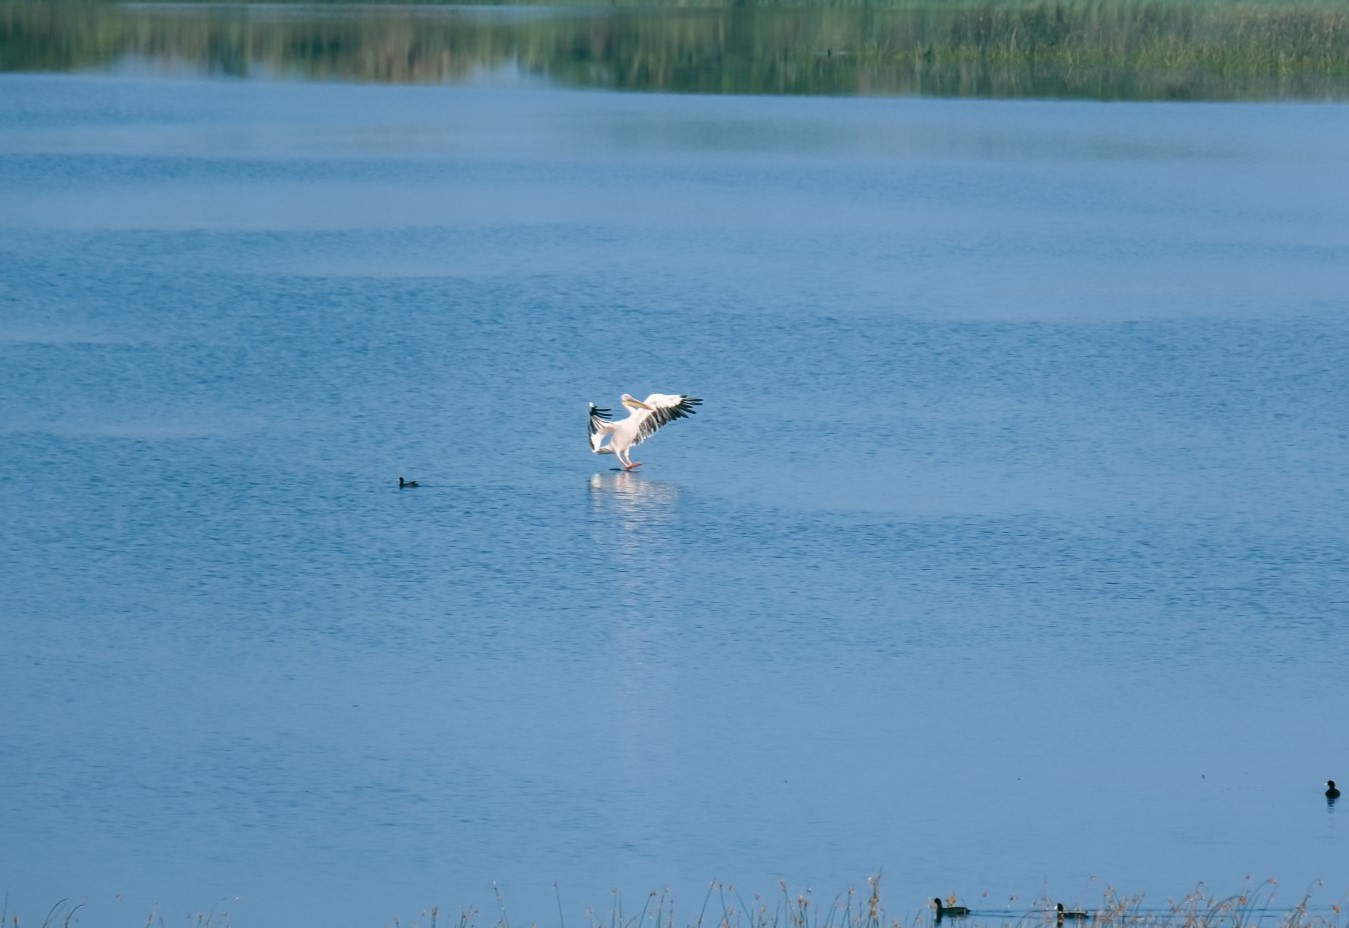 A solitary Rosy Pelican.